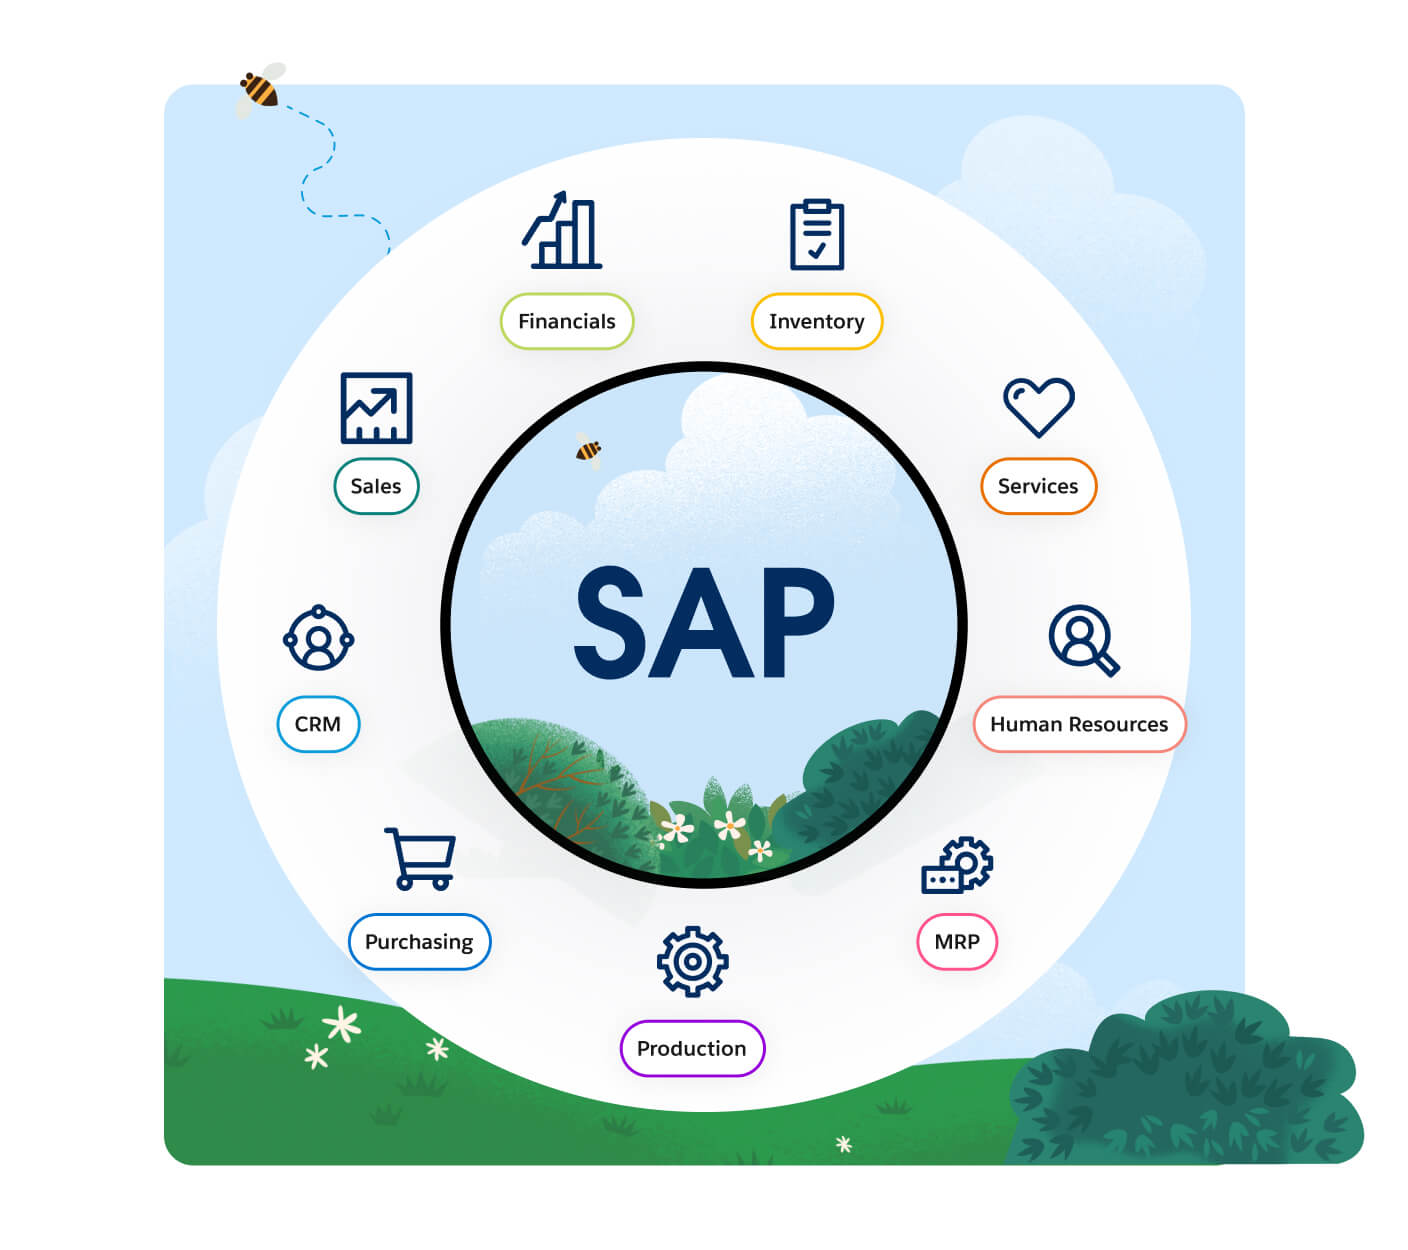 Connect SAP to any app, system, or device with MuleSoft